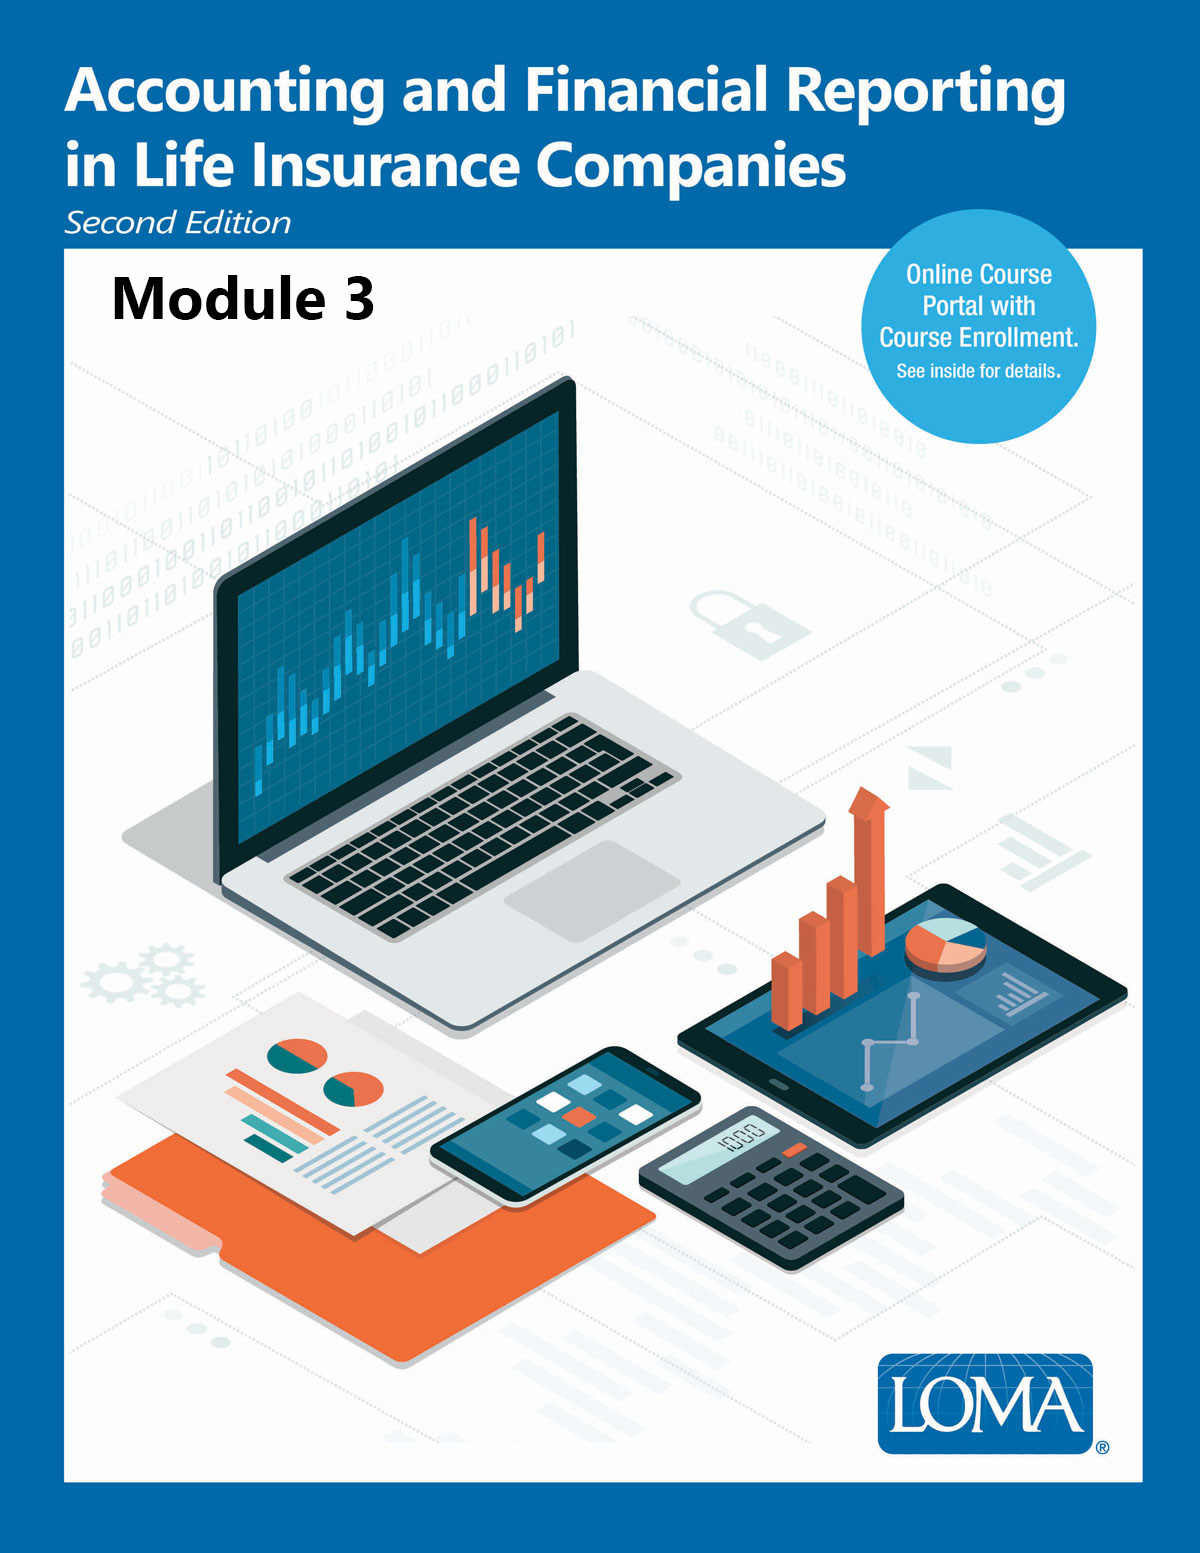 Accounting and Financial Reporting in Life Insurance Companies: 2nd Edition - Module 3